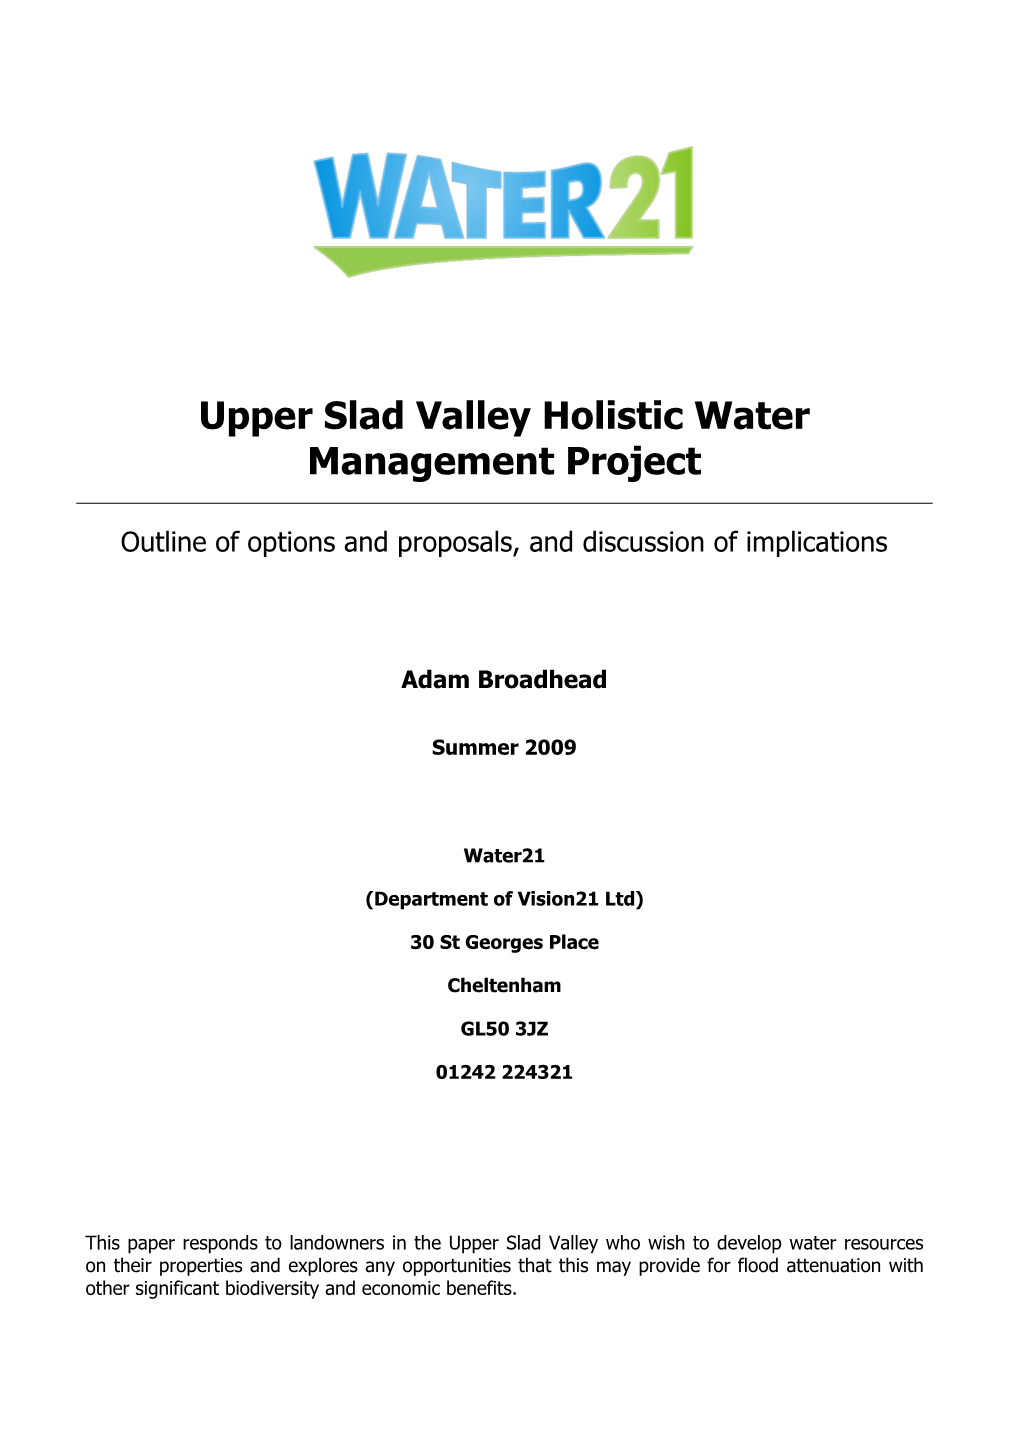 Upper Slad Valley Holistic Water Management Project